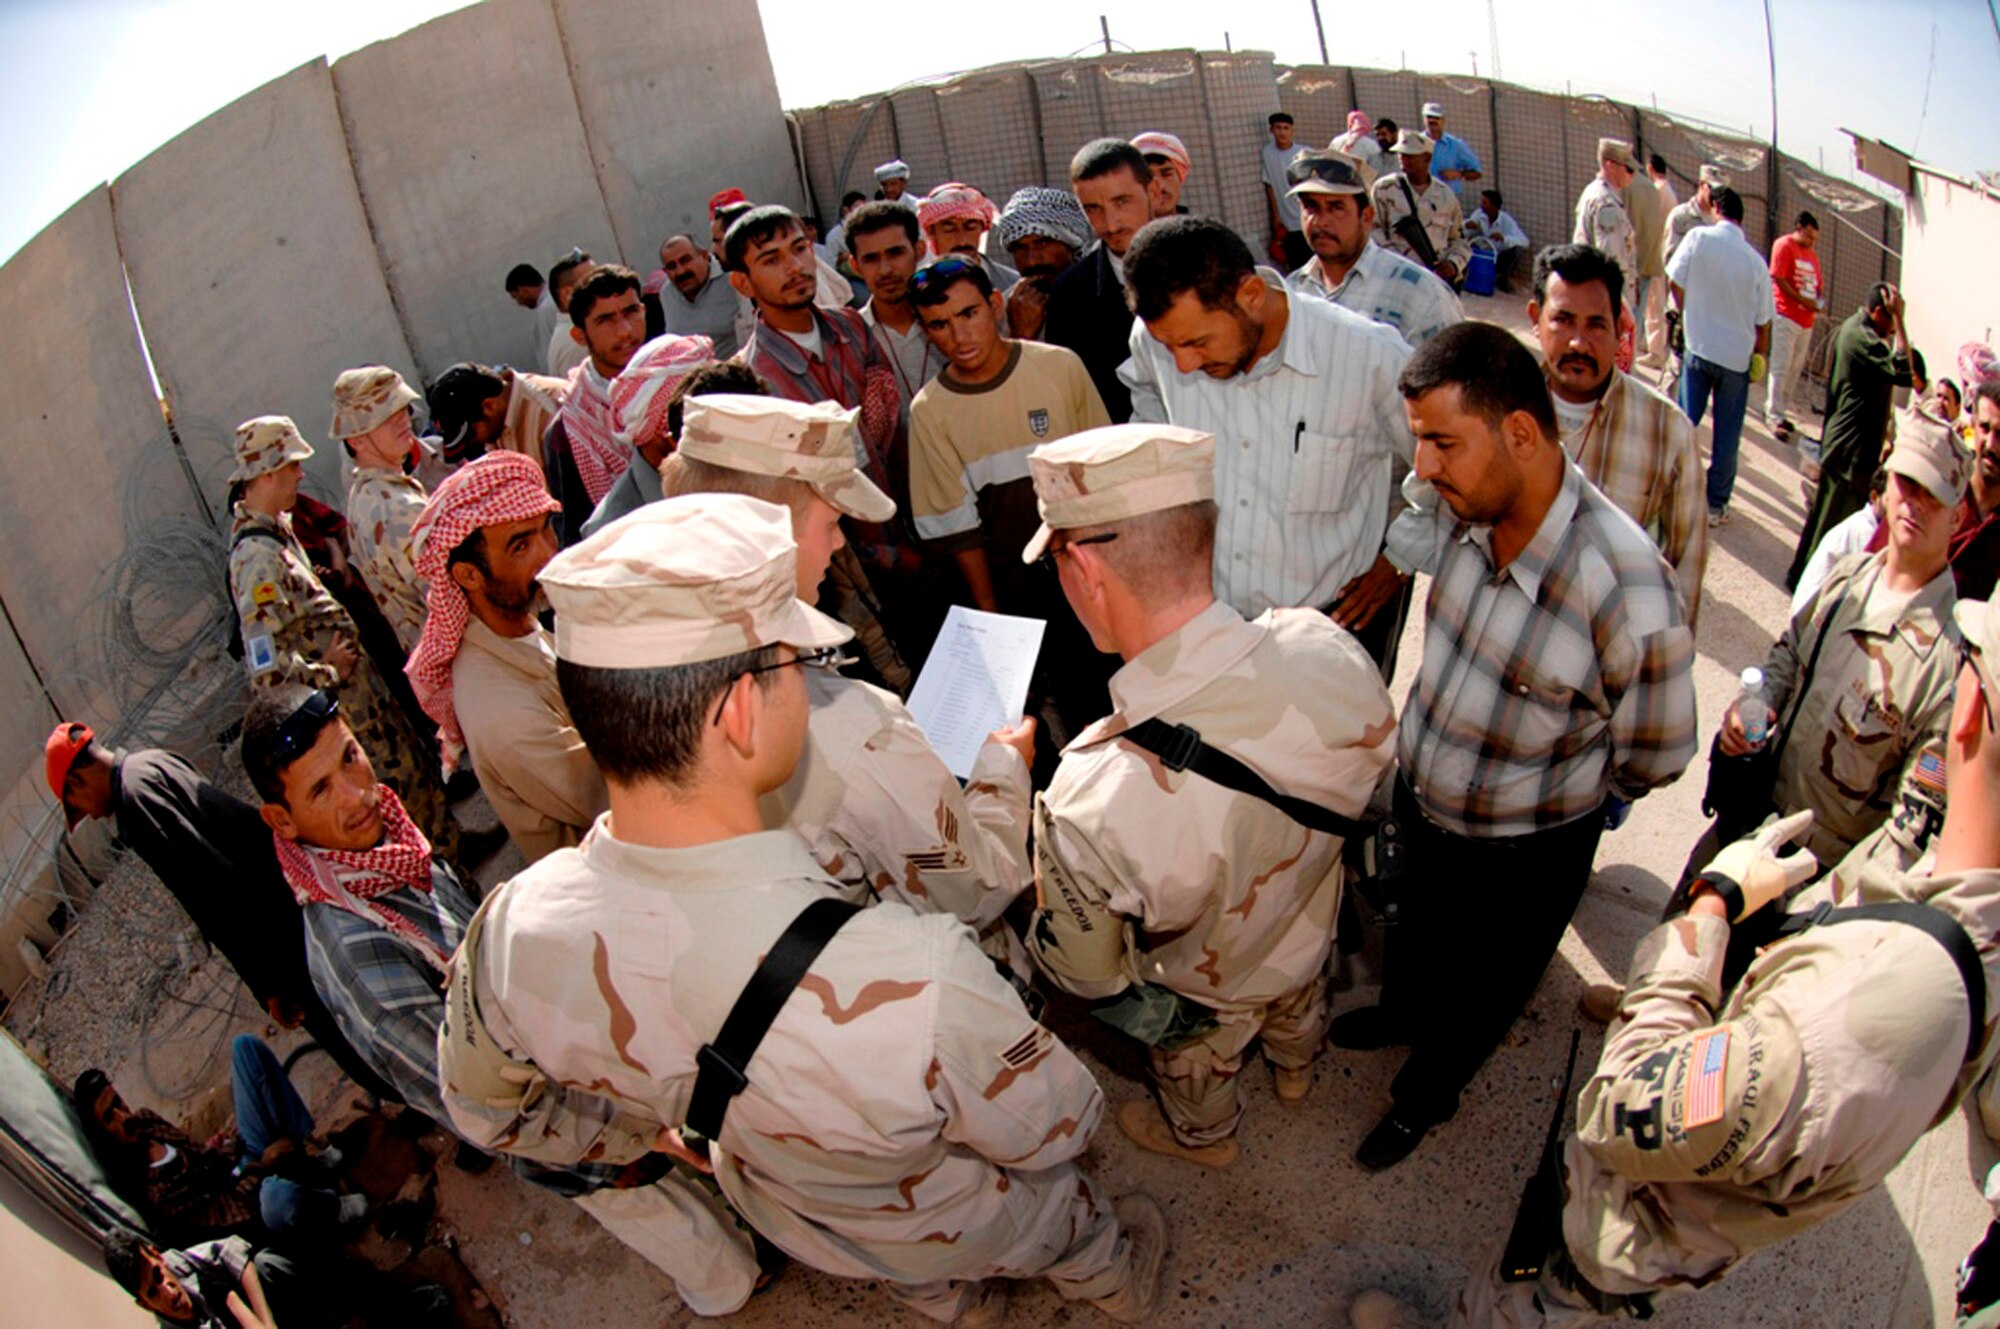 Members of the 407th Expeditionary Security Forces Squadron's Force Protection Flight at Ali Air Base, Iraq, review a list and hand out badges to local nationals waiting to be escorted on base to work.  This process is done every day to ensure the safety and security of the bases personnel and assets. FPF Airmen monitor local and third country nationals to detect suspicious activity, augment security forces during increased force protection conditions, and monitor and maintain installation security measures. (U.S. Air Force photo/Master Sgt. Robert W. Valenca) 